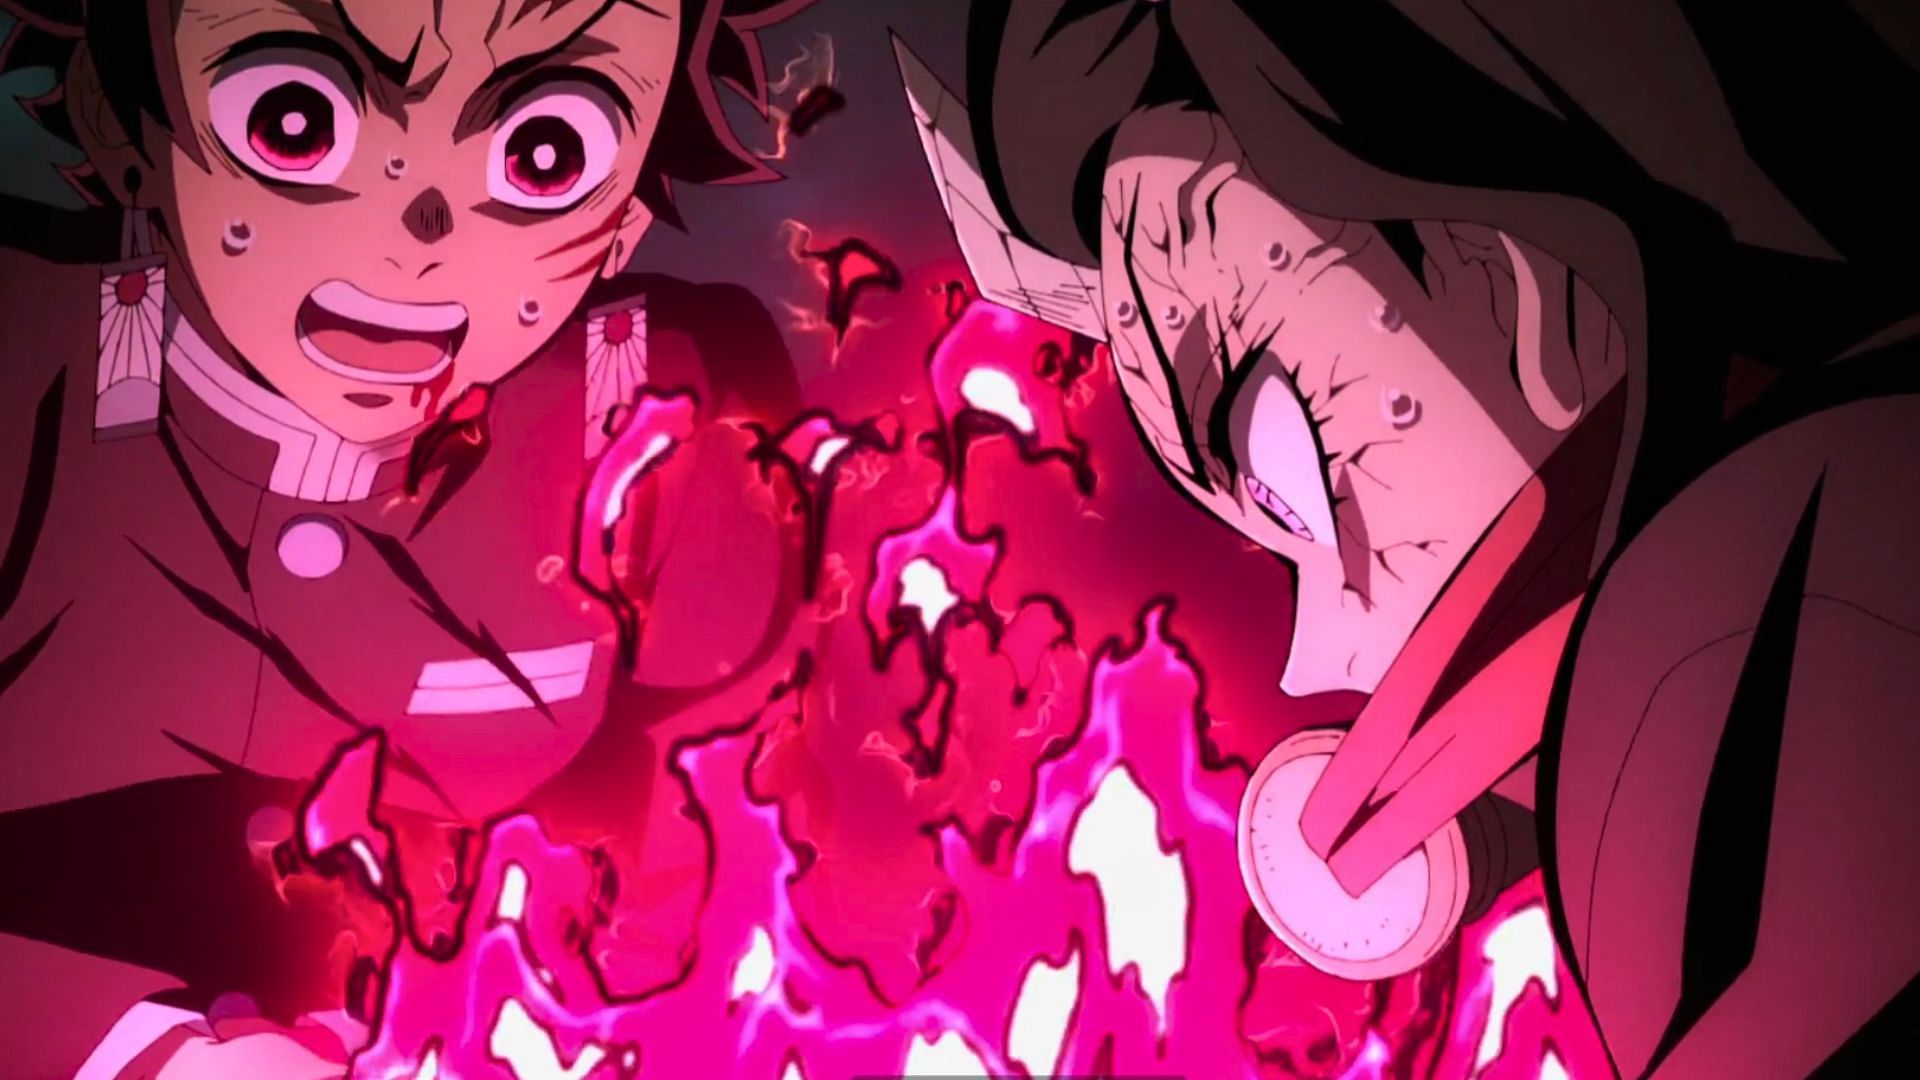 Genya's obsession with becoming a Hashira shows in Demon Slayer S3 Episode 6  - Hindustan Times